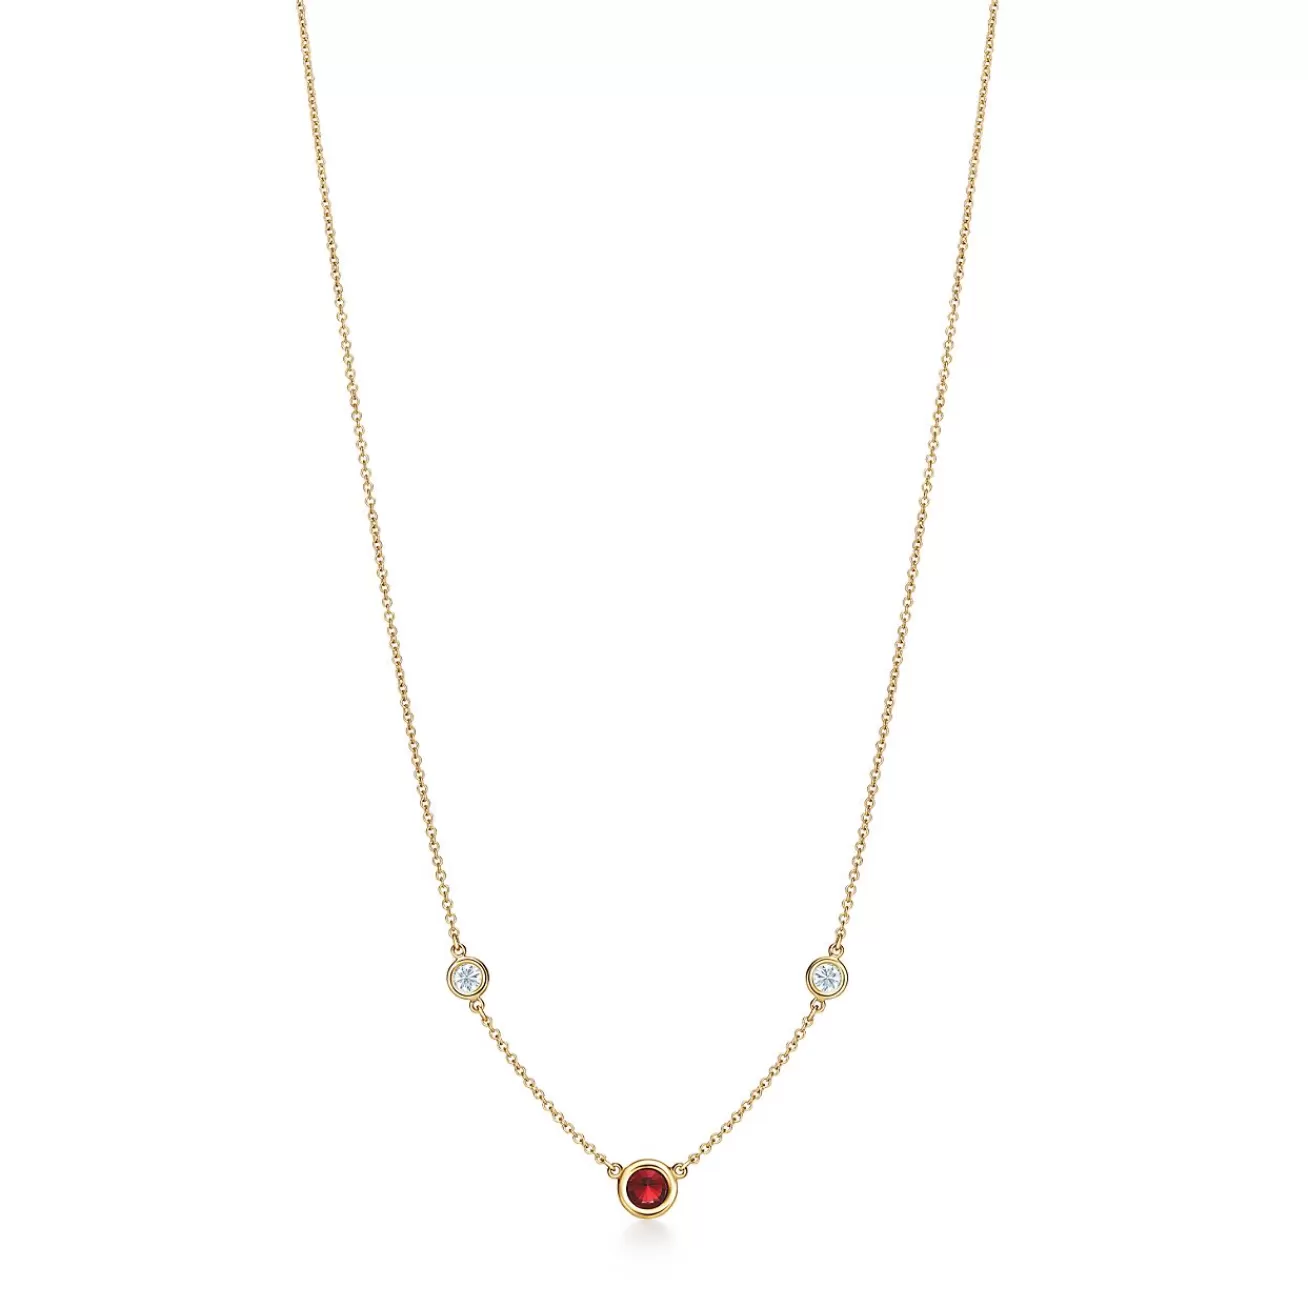 Tiffany & Co. Elsa Peretti® Color by the Yard necklace in 18k gold with a ruby and diamonds. | ^ Necklaces & Pendants | Gold Jewelry